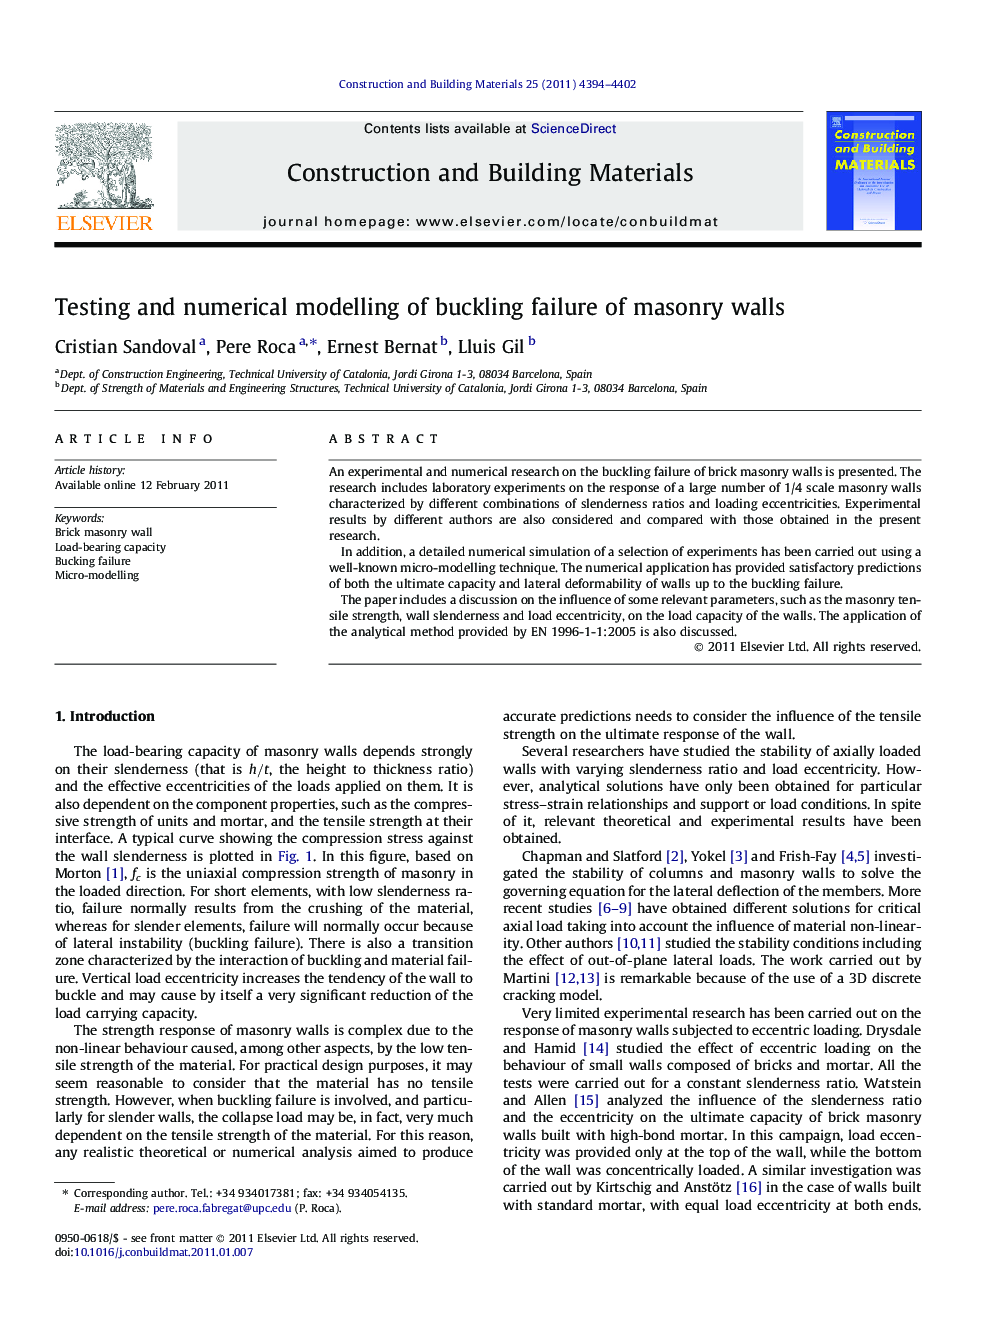 Testing and numerical modelling of buckling failure of masonry walls